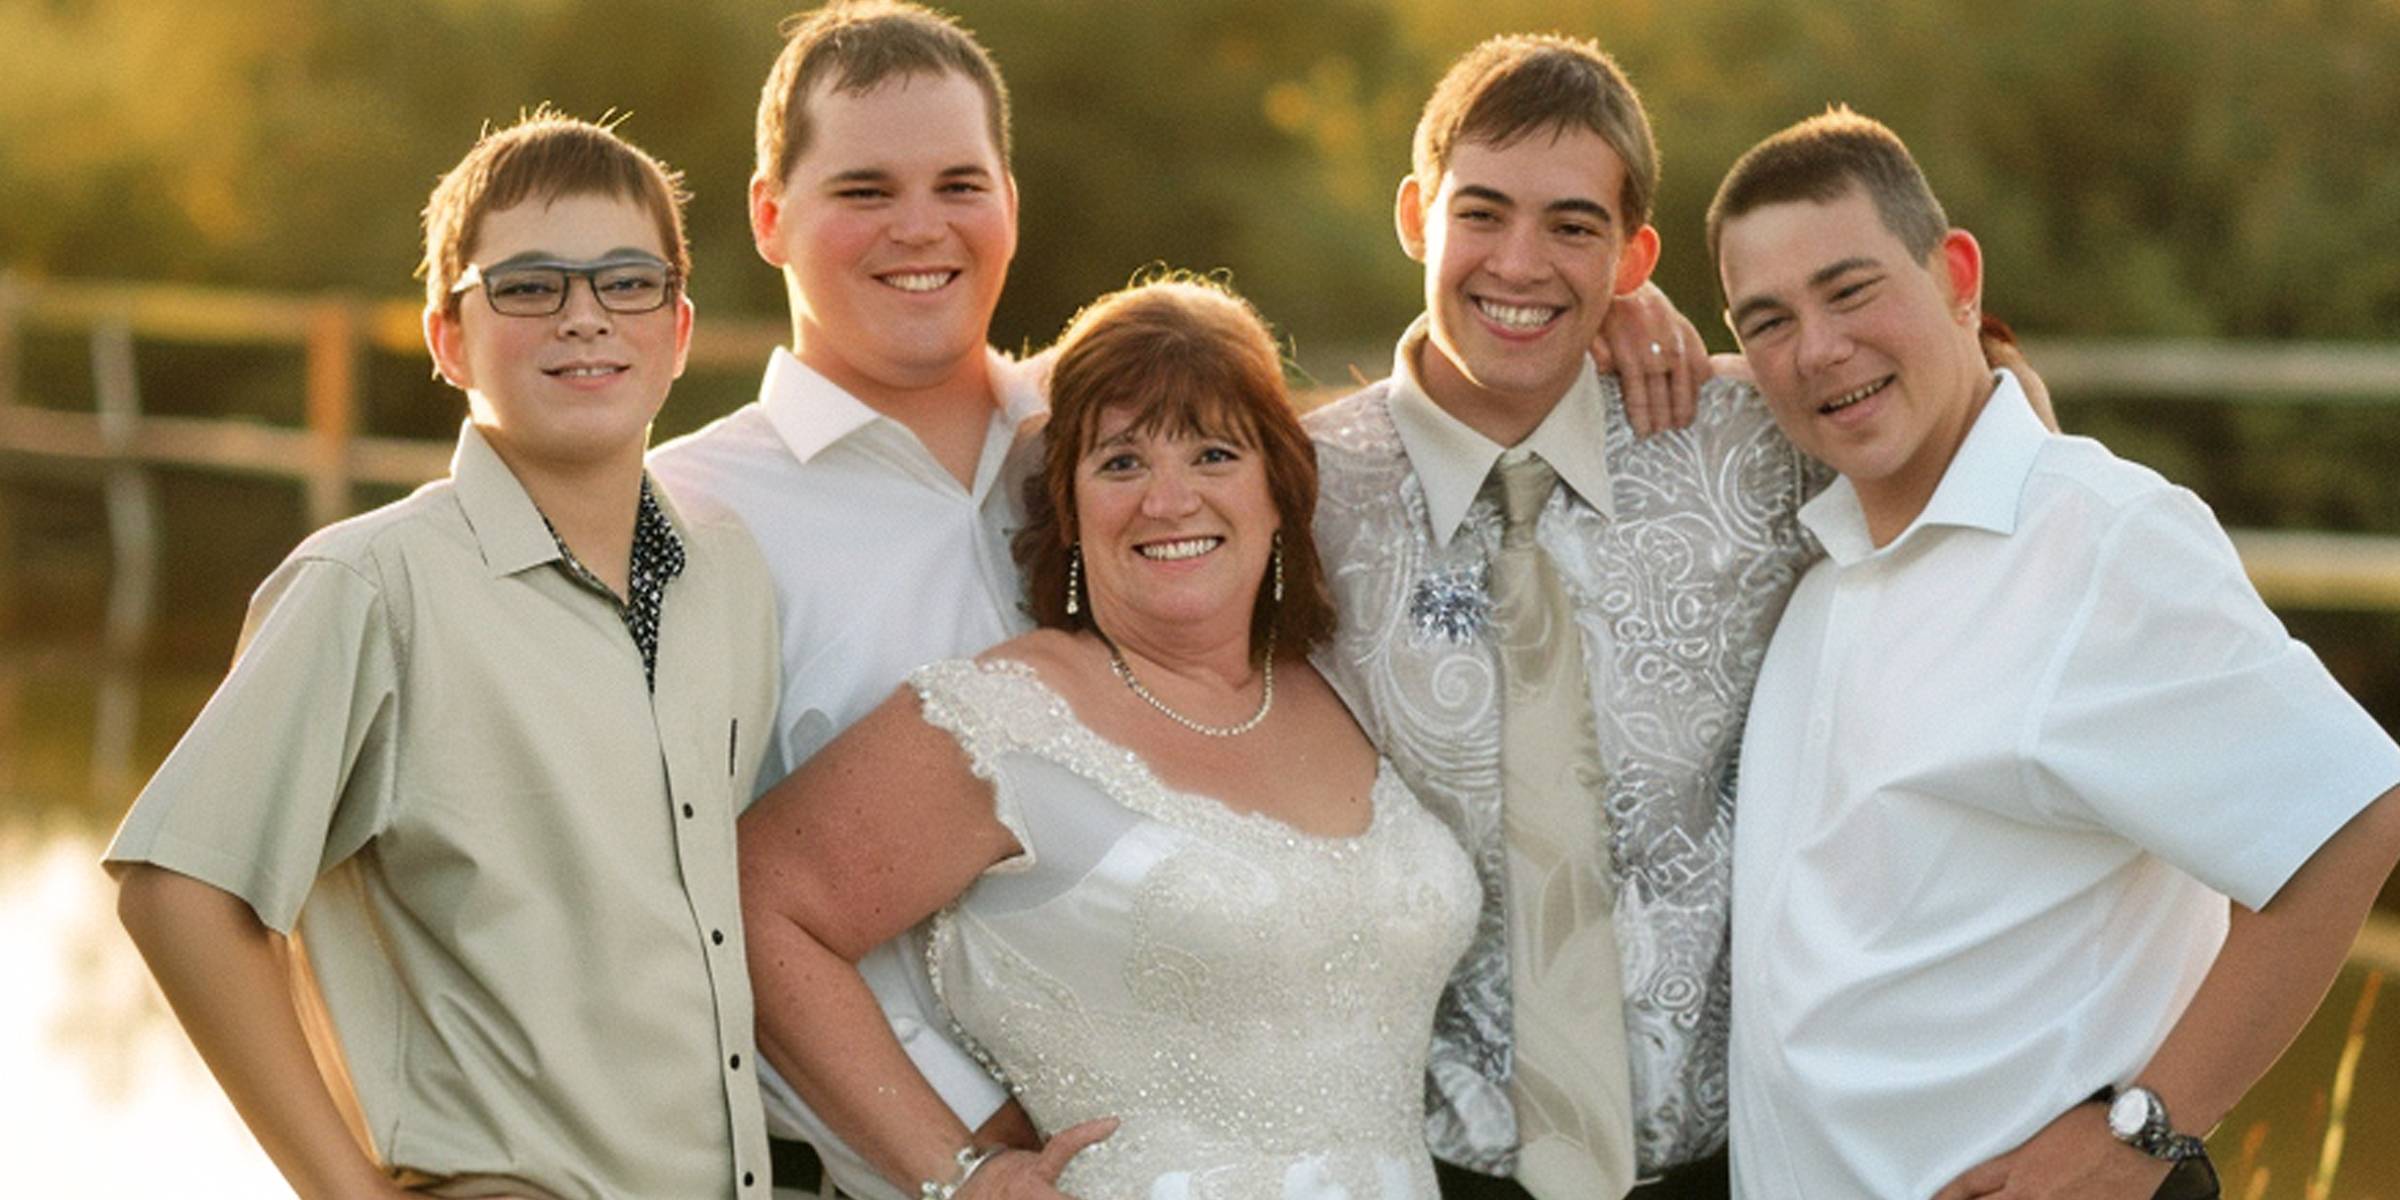 A woman with her four sons | Source: Amomama